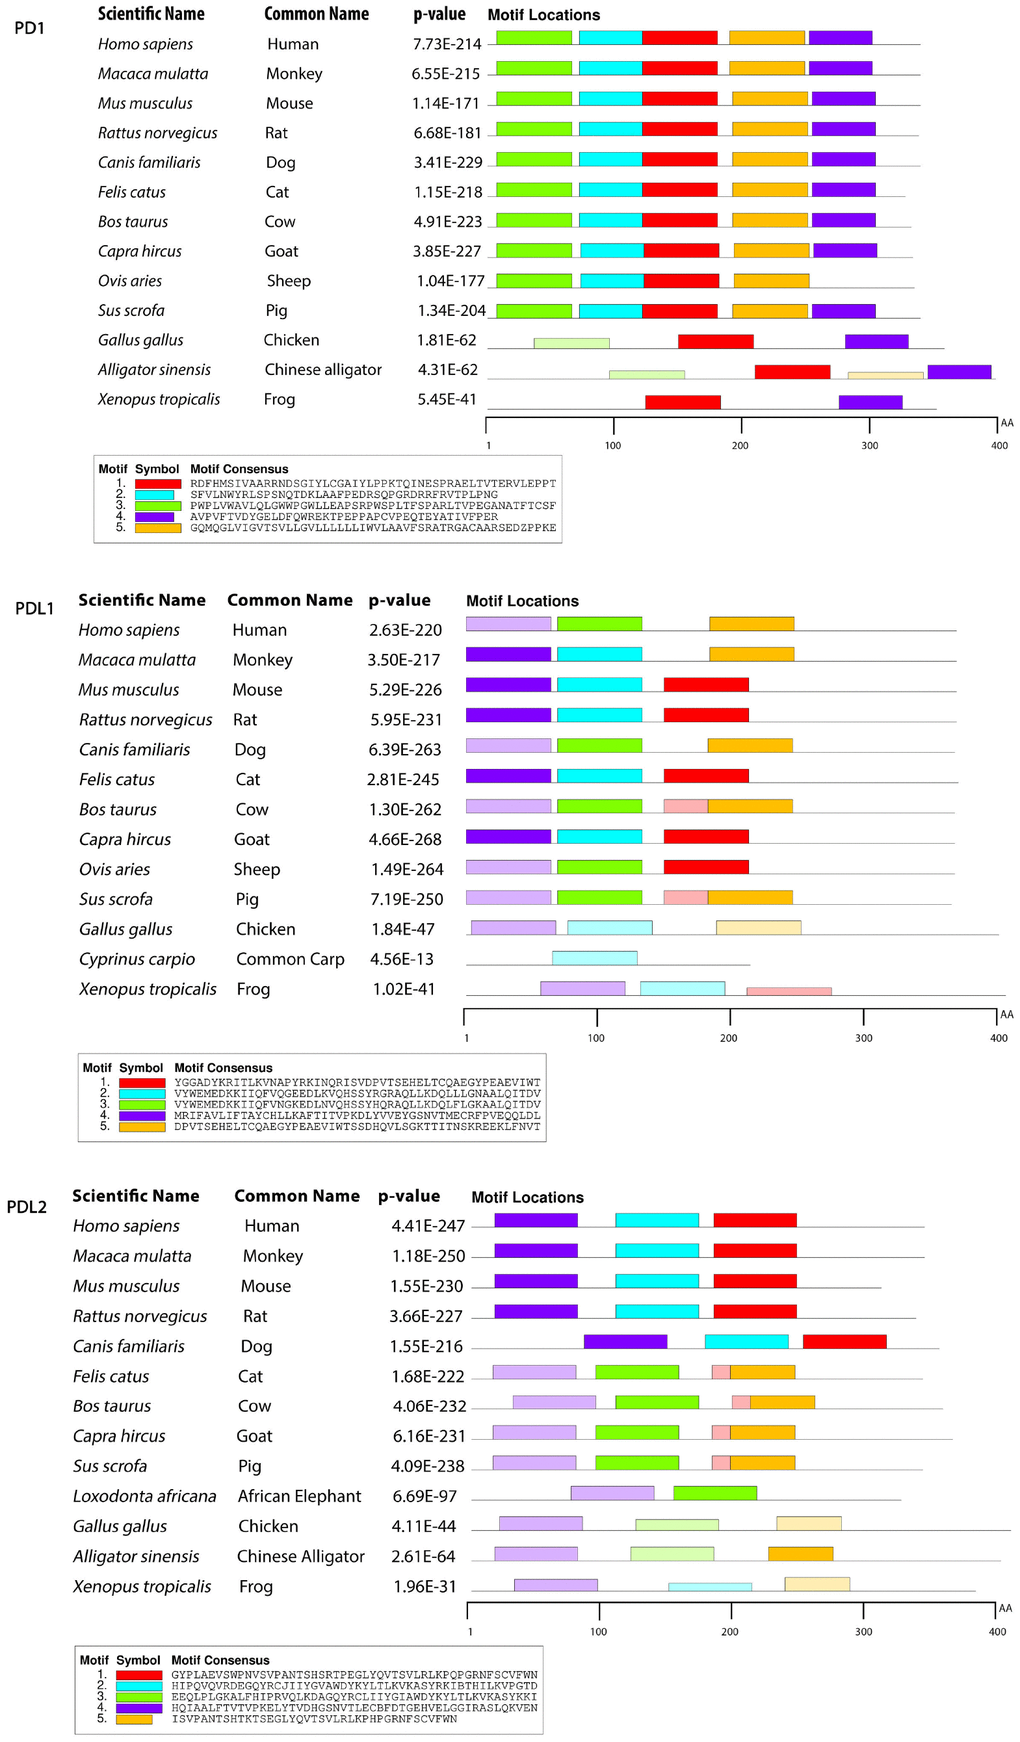 Motif distribution of PD1, PD-L1 and PD-L2 genes in representative vertebrate species. Motifs of these genes from representative species from each group are predicted using MEME suite (http://meme-suite.org/) based on amino acid sequences. All sequences are separated by 5 conservative motifs with colors, including motif 1 (red), motif 2 (cyan), motif 3 (green), motif 4 (purple) and motif 5 (brown).